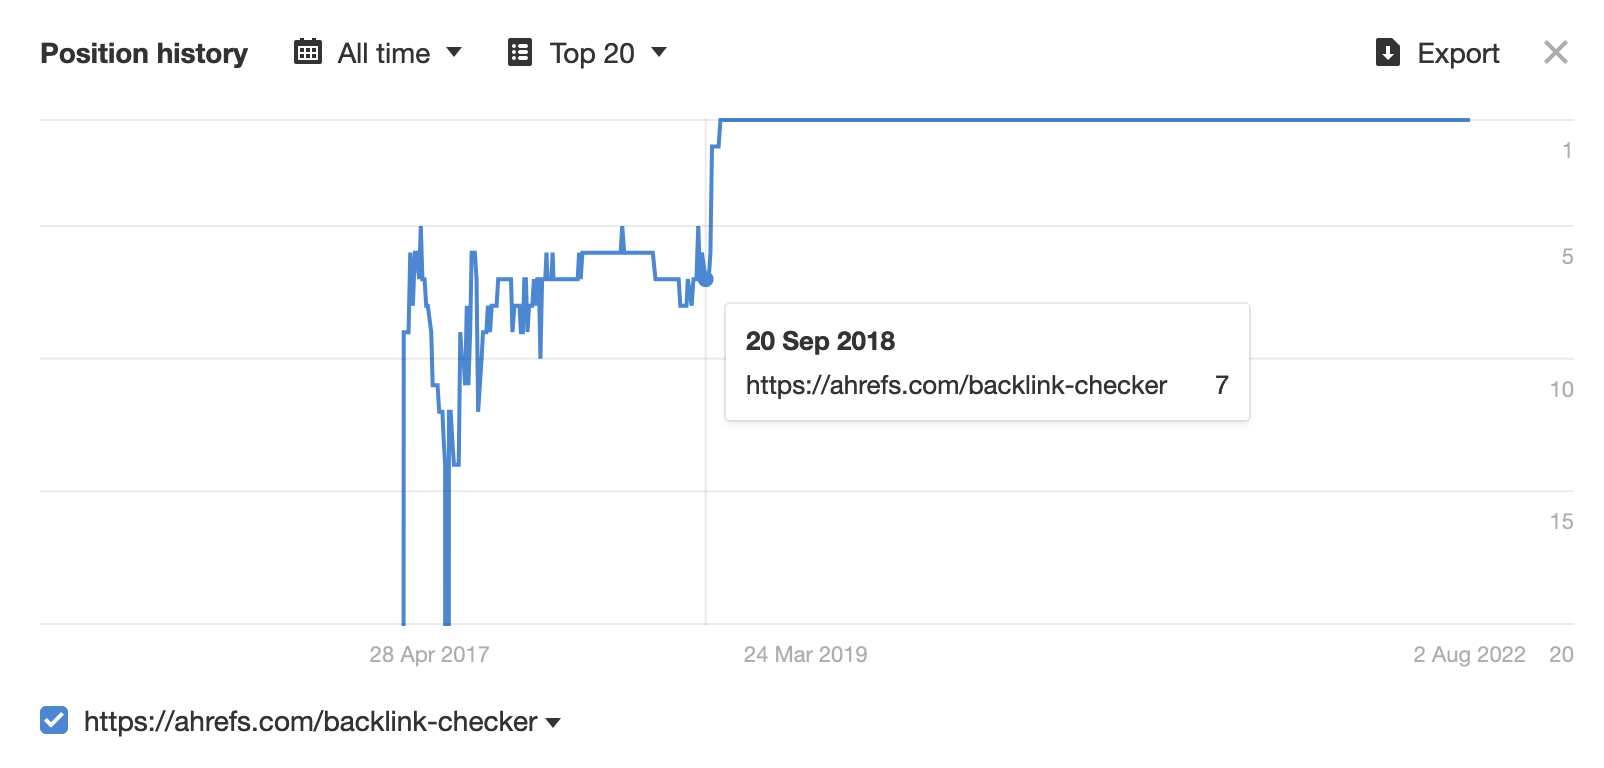 Our rankings for "backlink checker" over time, via Ahrefs' Rank Tracker
